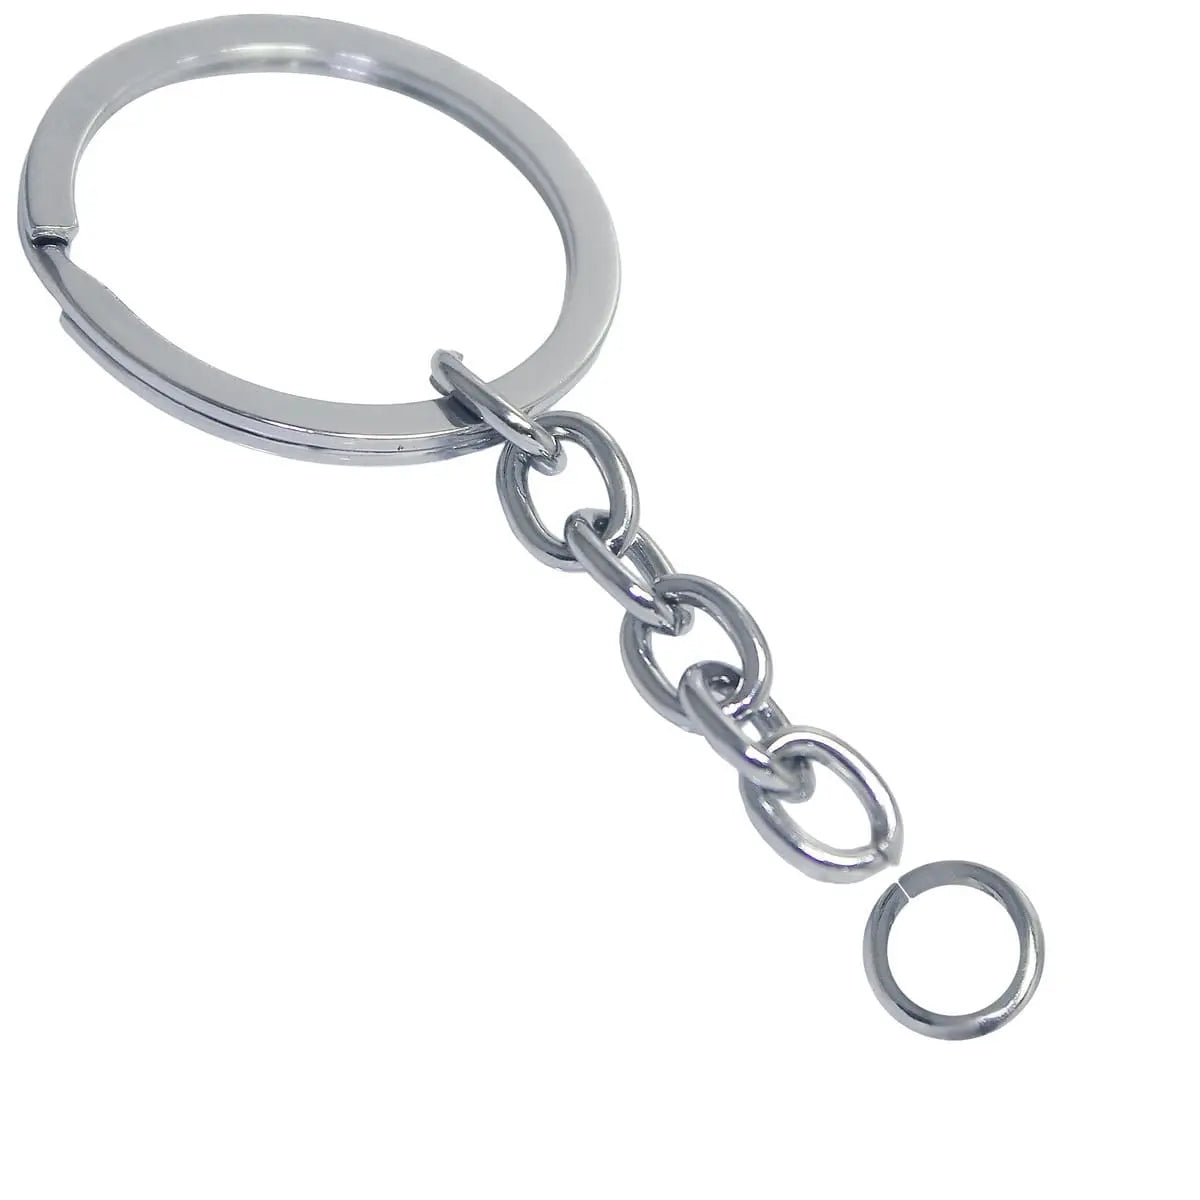 Canvazo Metal Keychain Rings with Chain Pack of 12 Canvazo